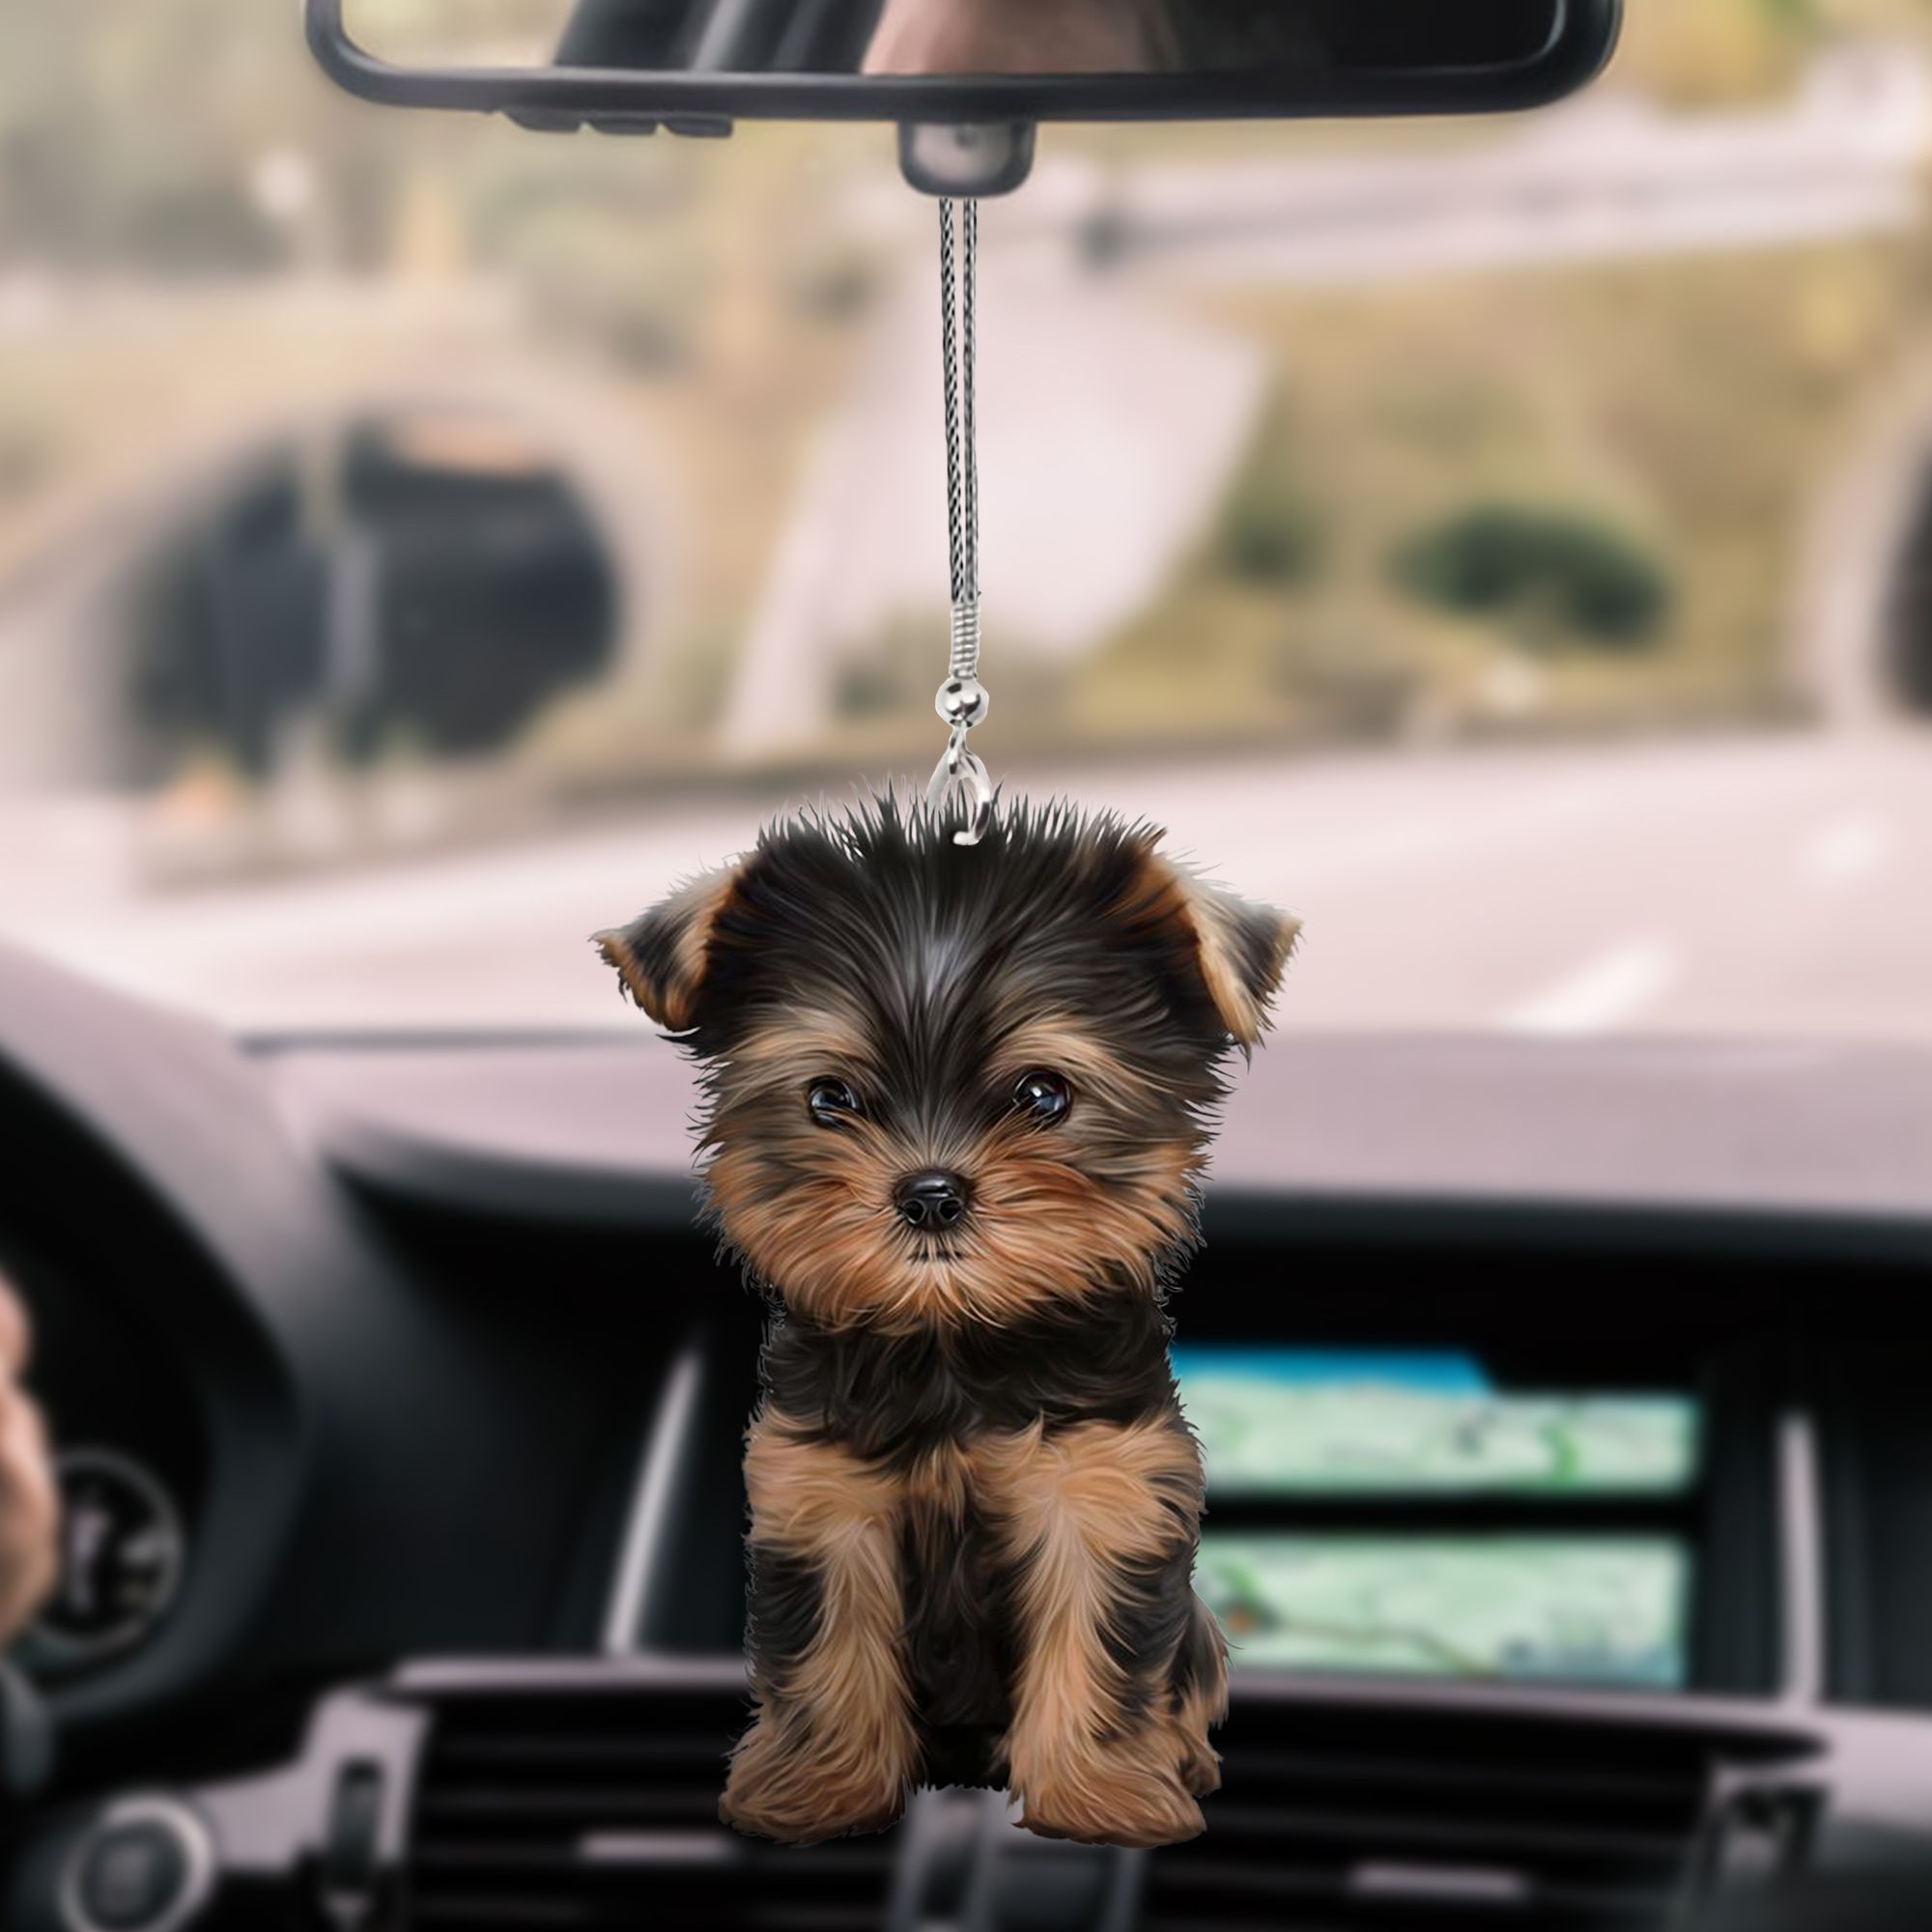 yorkshire-terrier-sitting-py76-ntt070997-nct-car-hanging-ornament